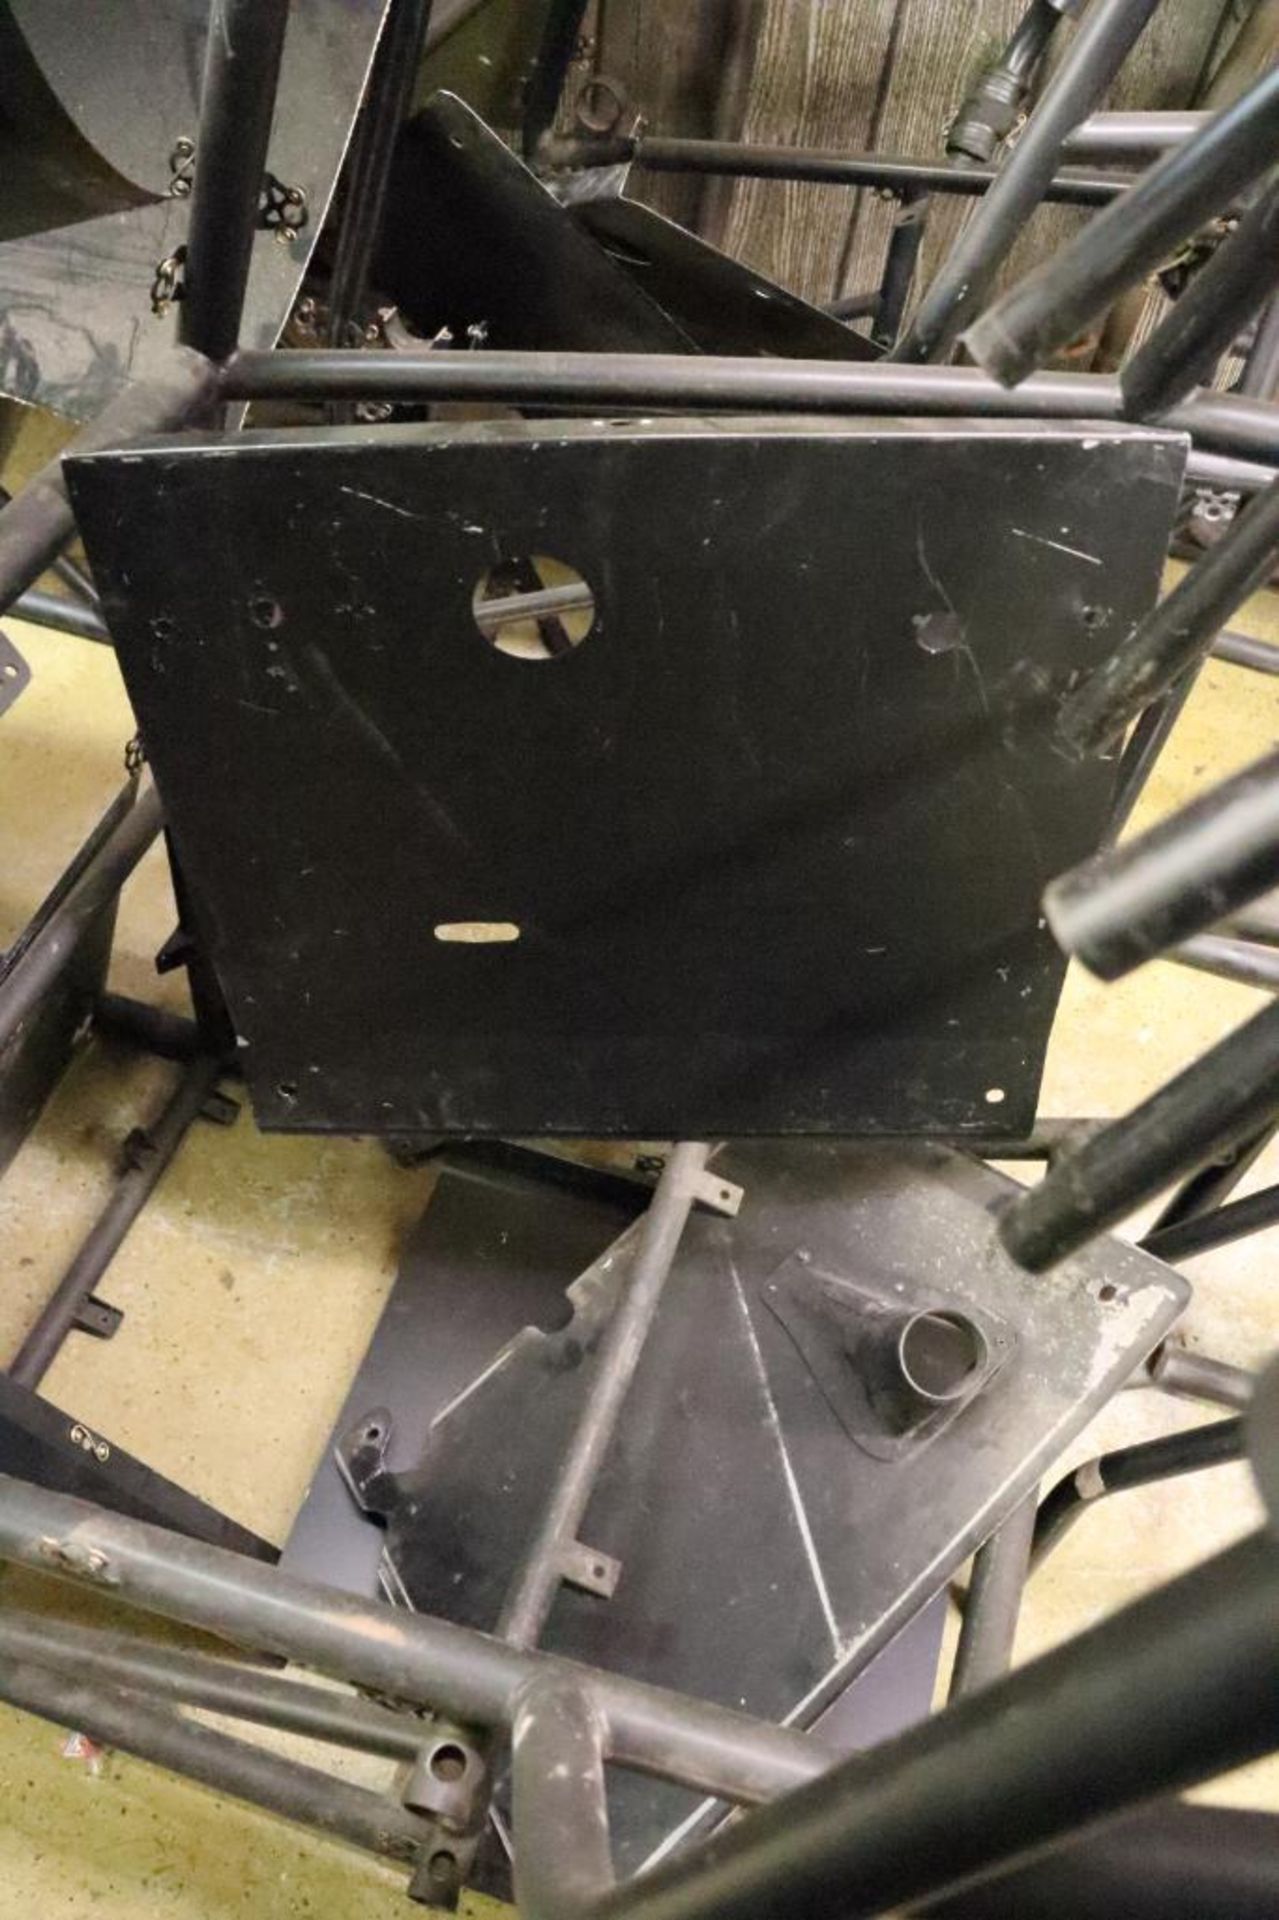 Smith Ingersoll-Rand sprint car w/ body panels & components - Image 19 of 27